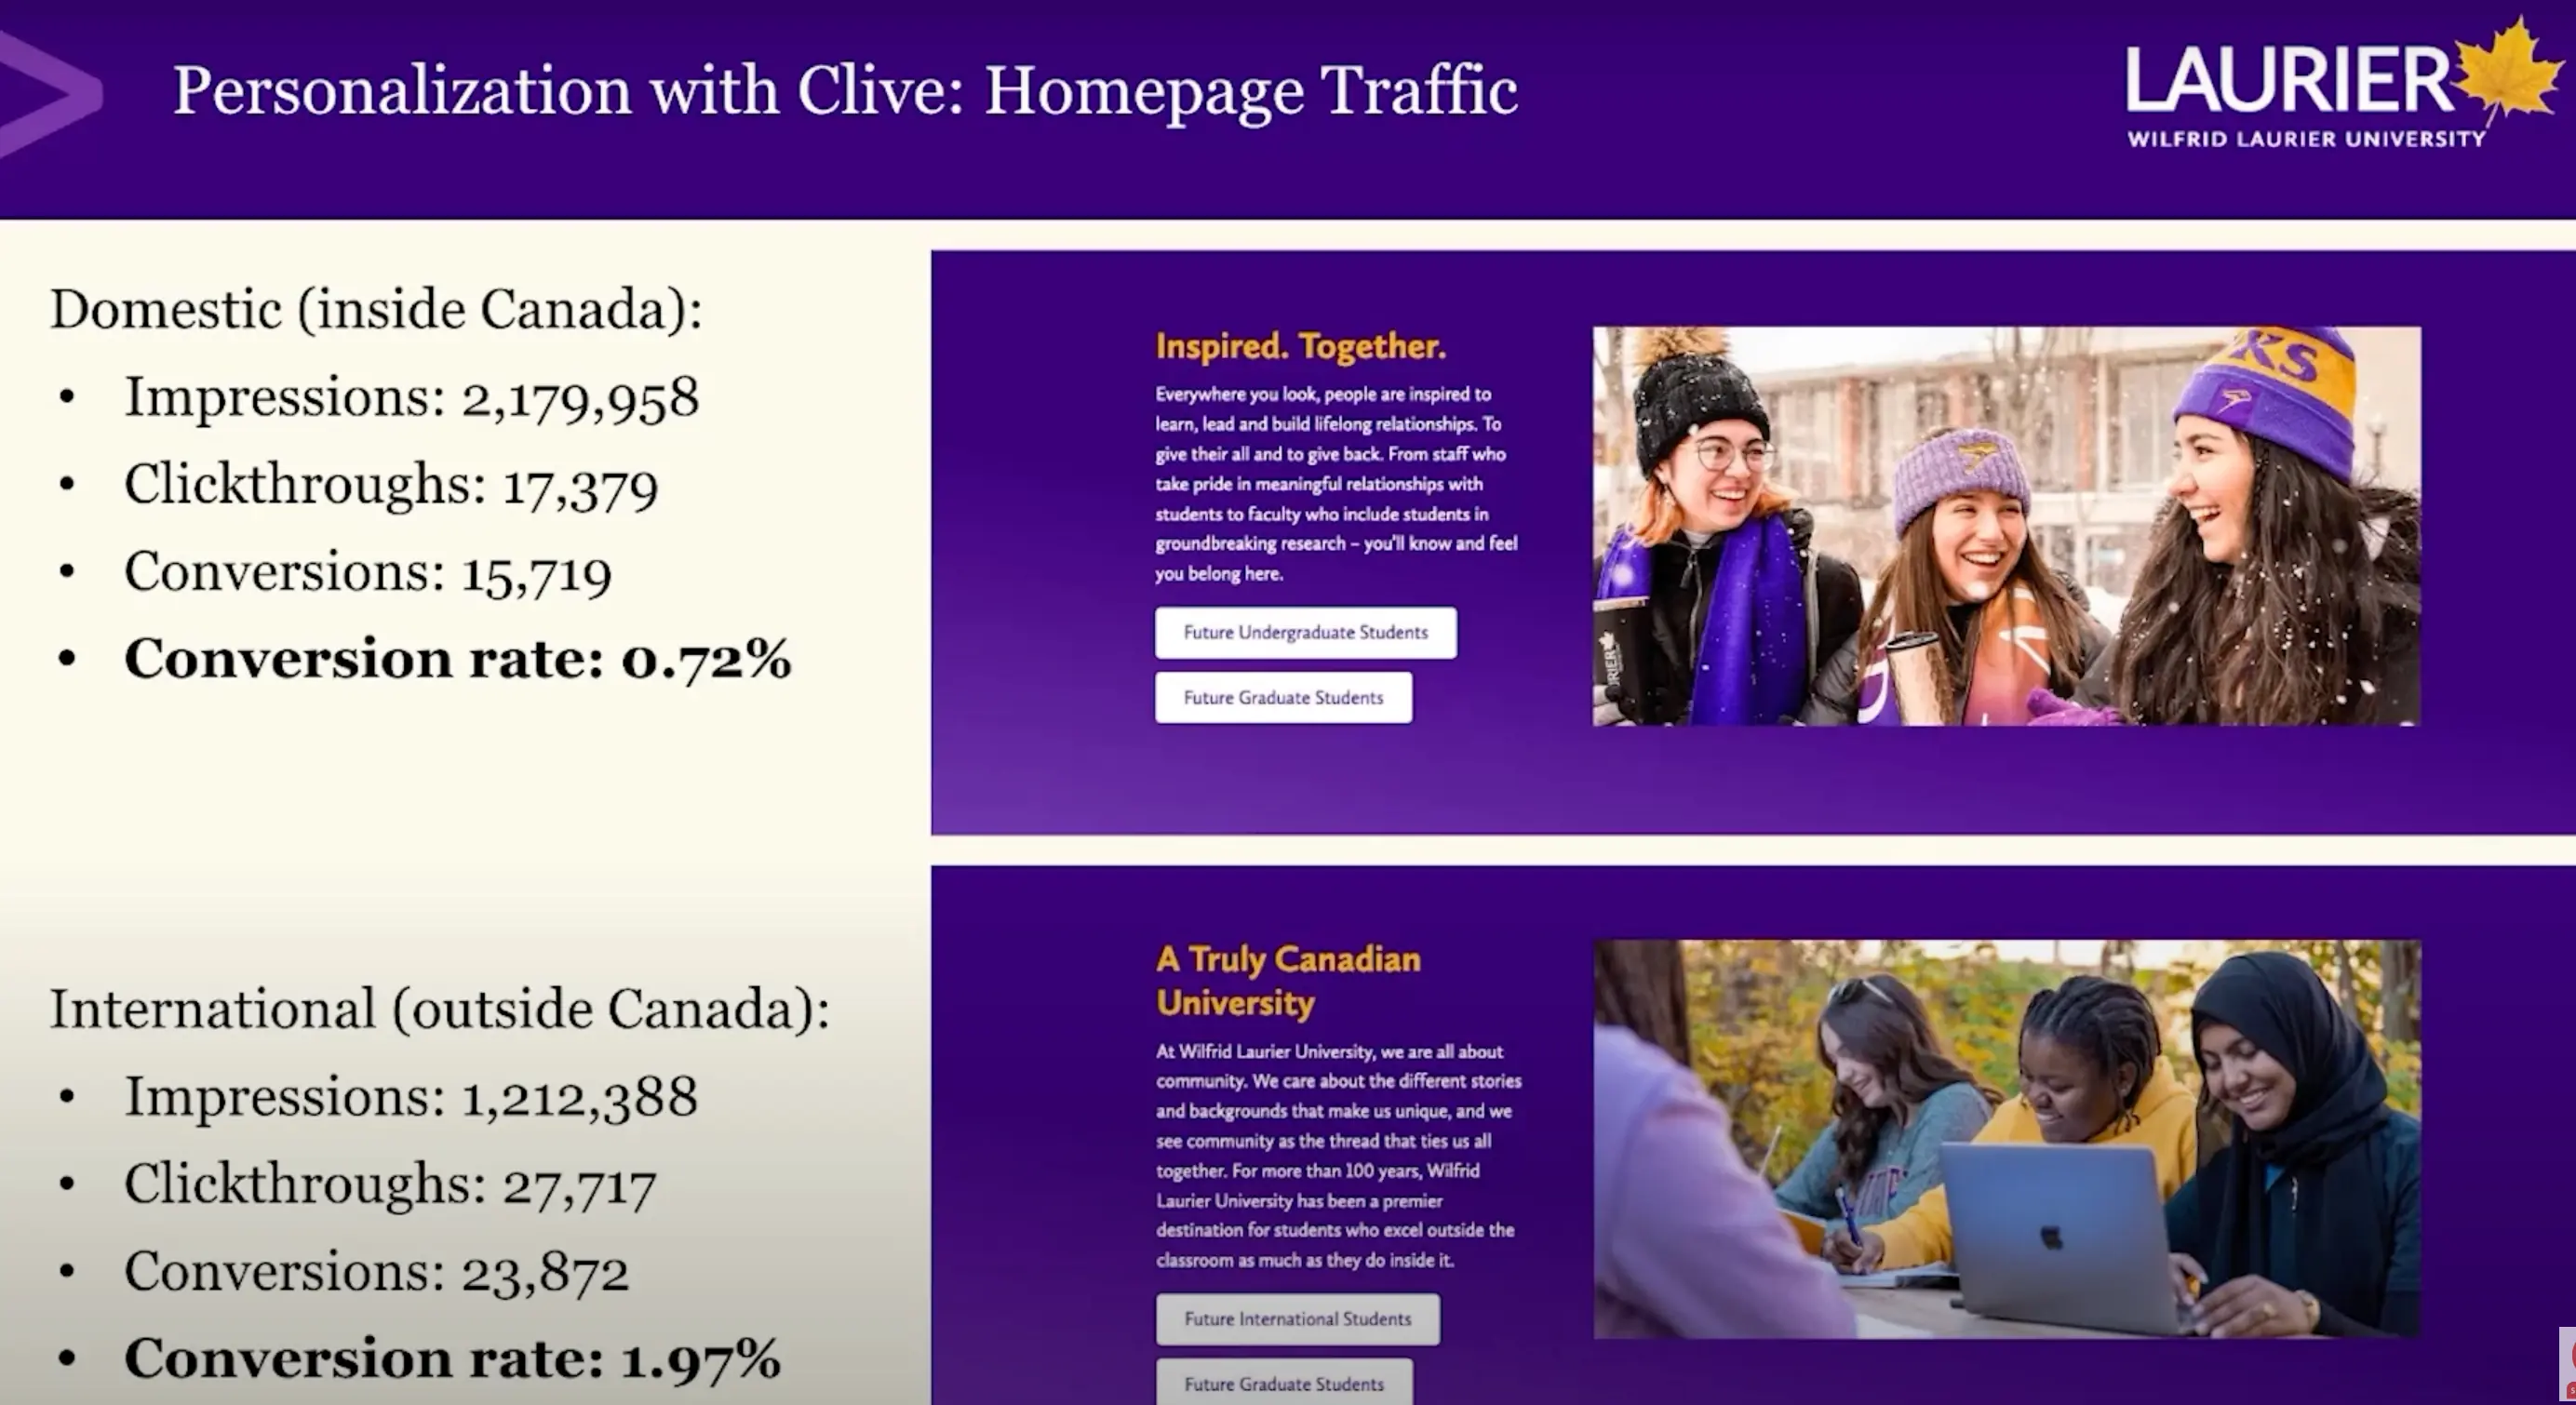 A slide showing web traffic data for Wilfrid Laurier University, comparing domestic and international visitor engagement.